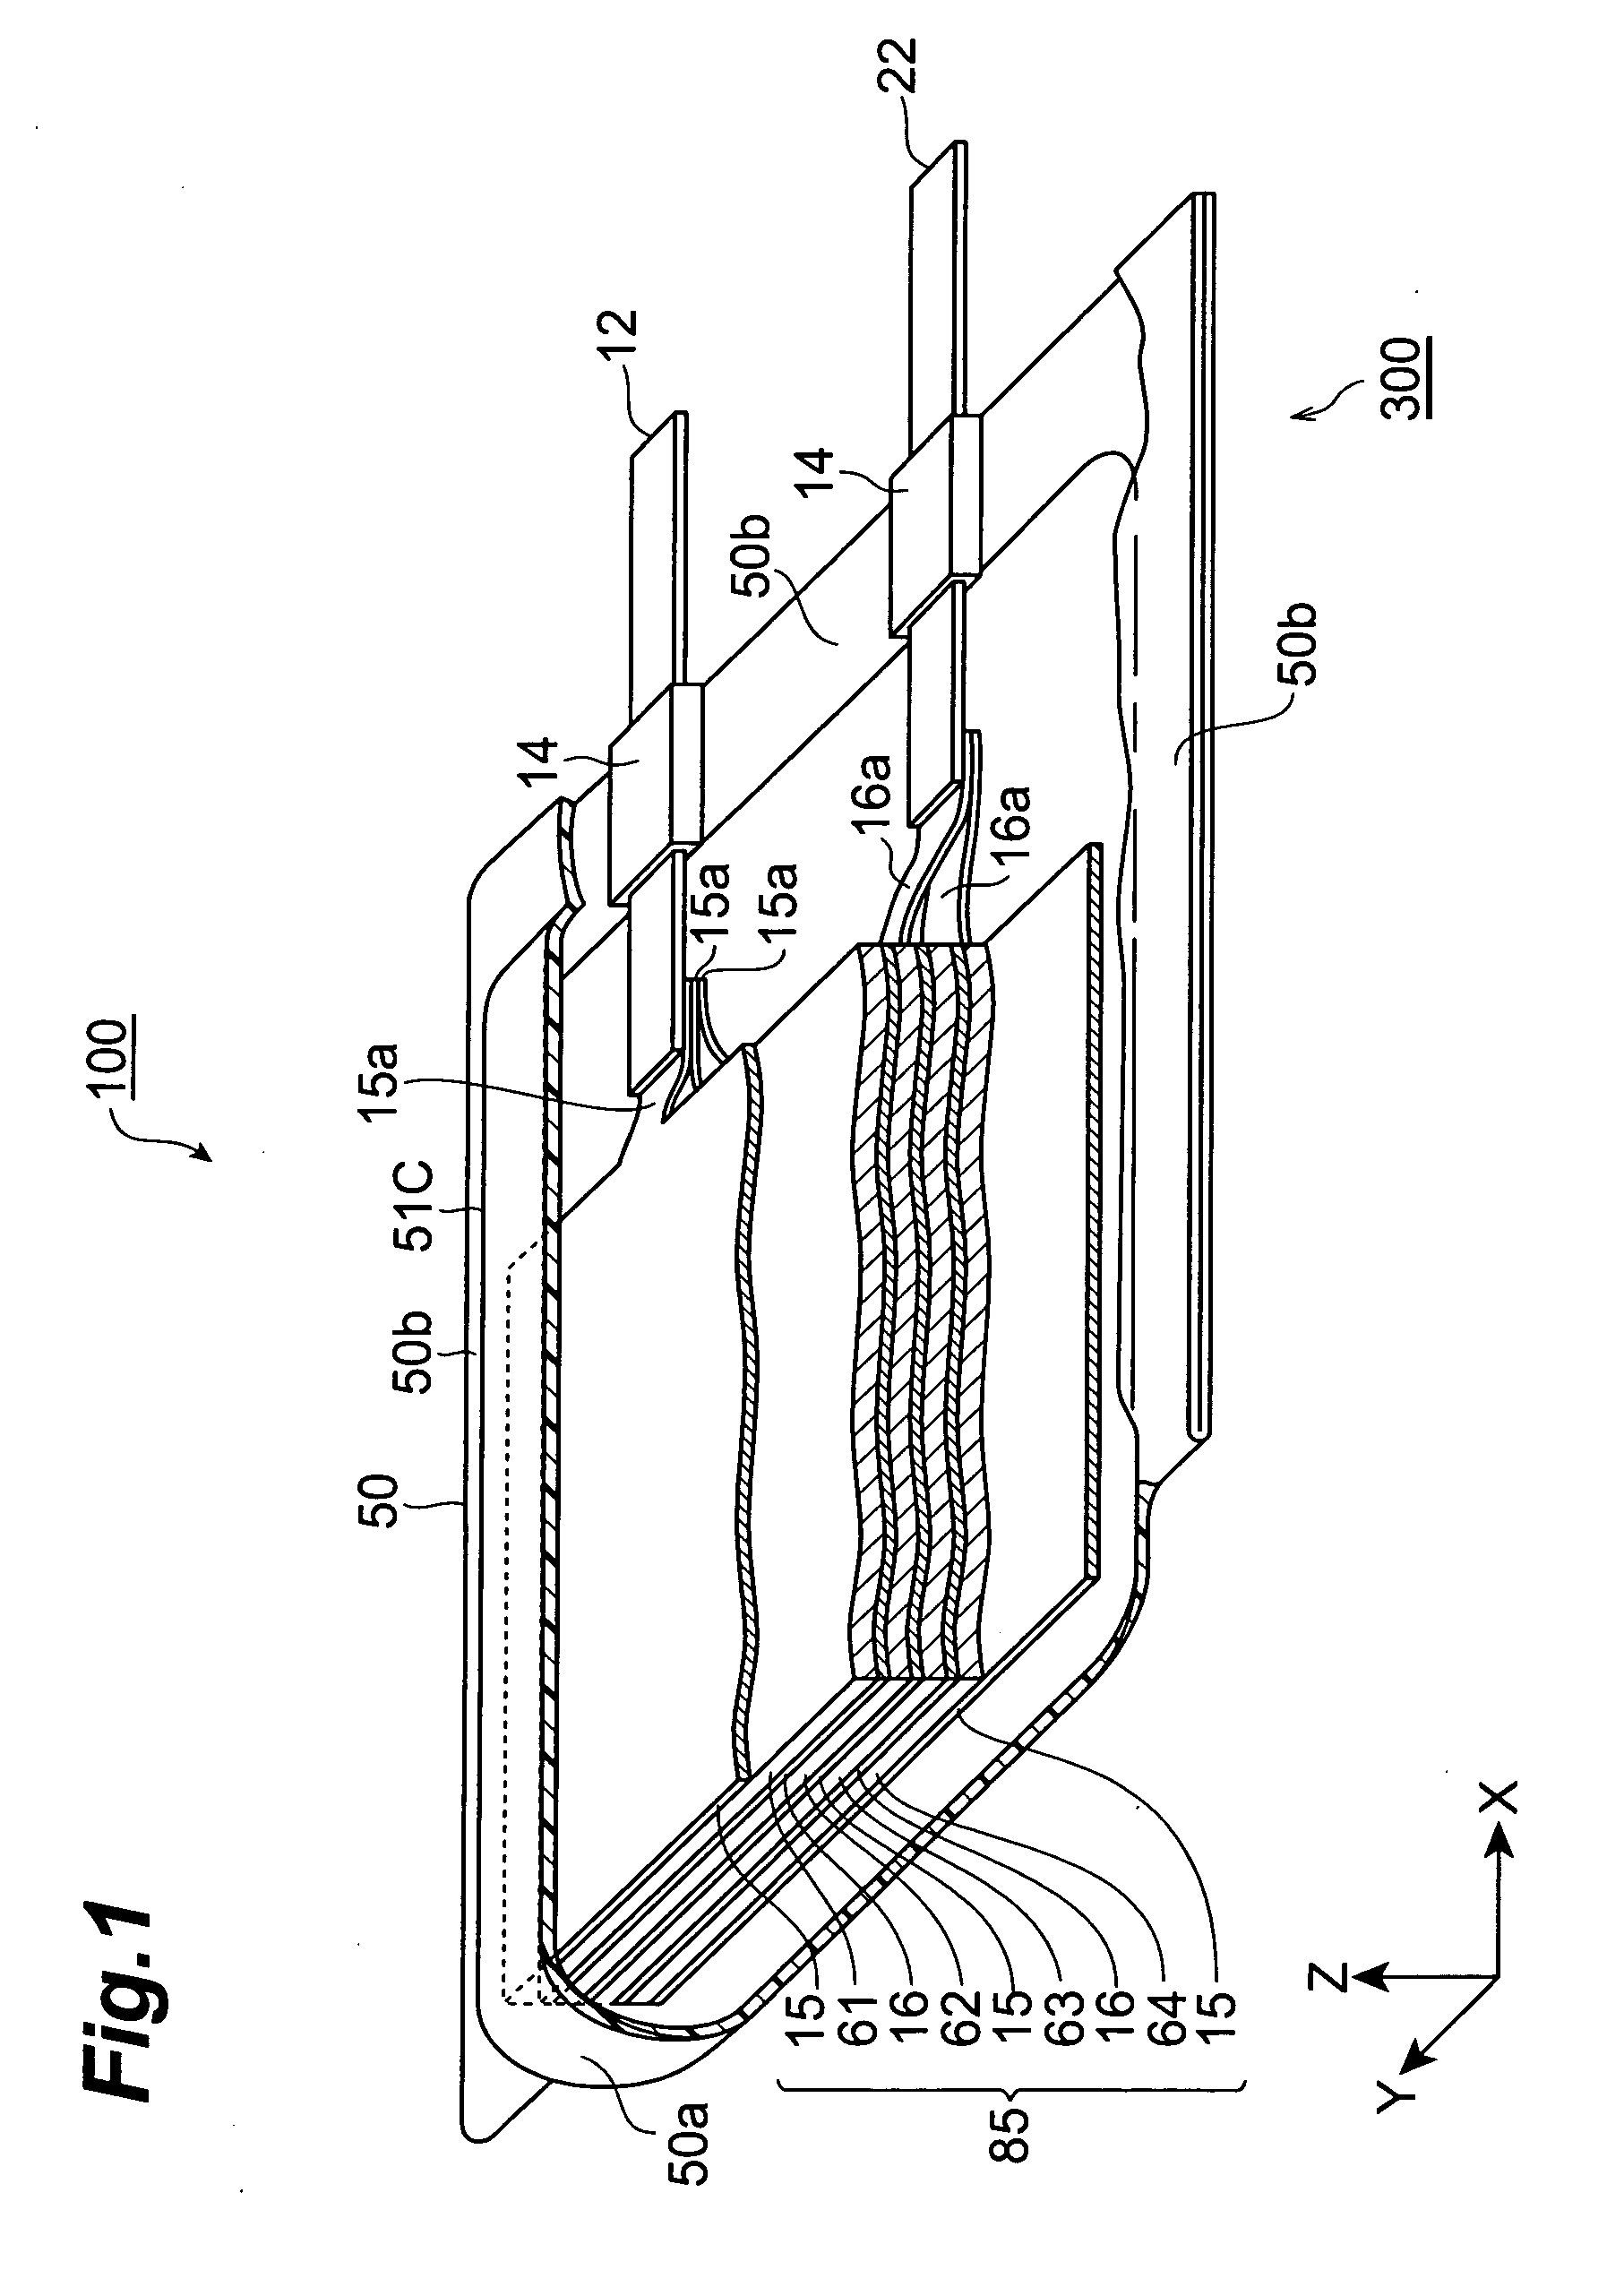 Lithium-ion secondary battery and method of charging lithium-ion secondary battery